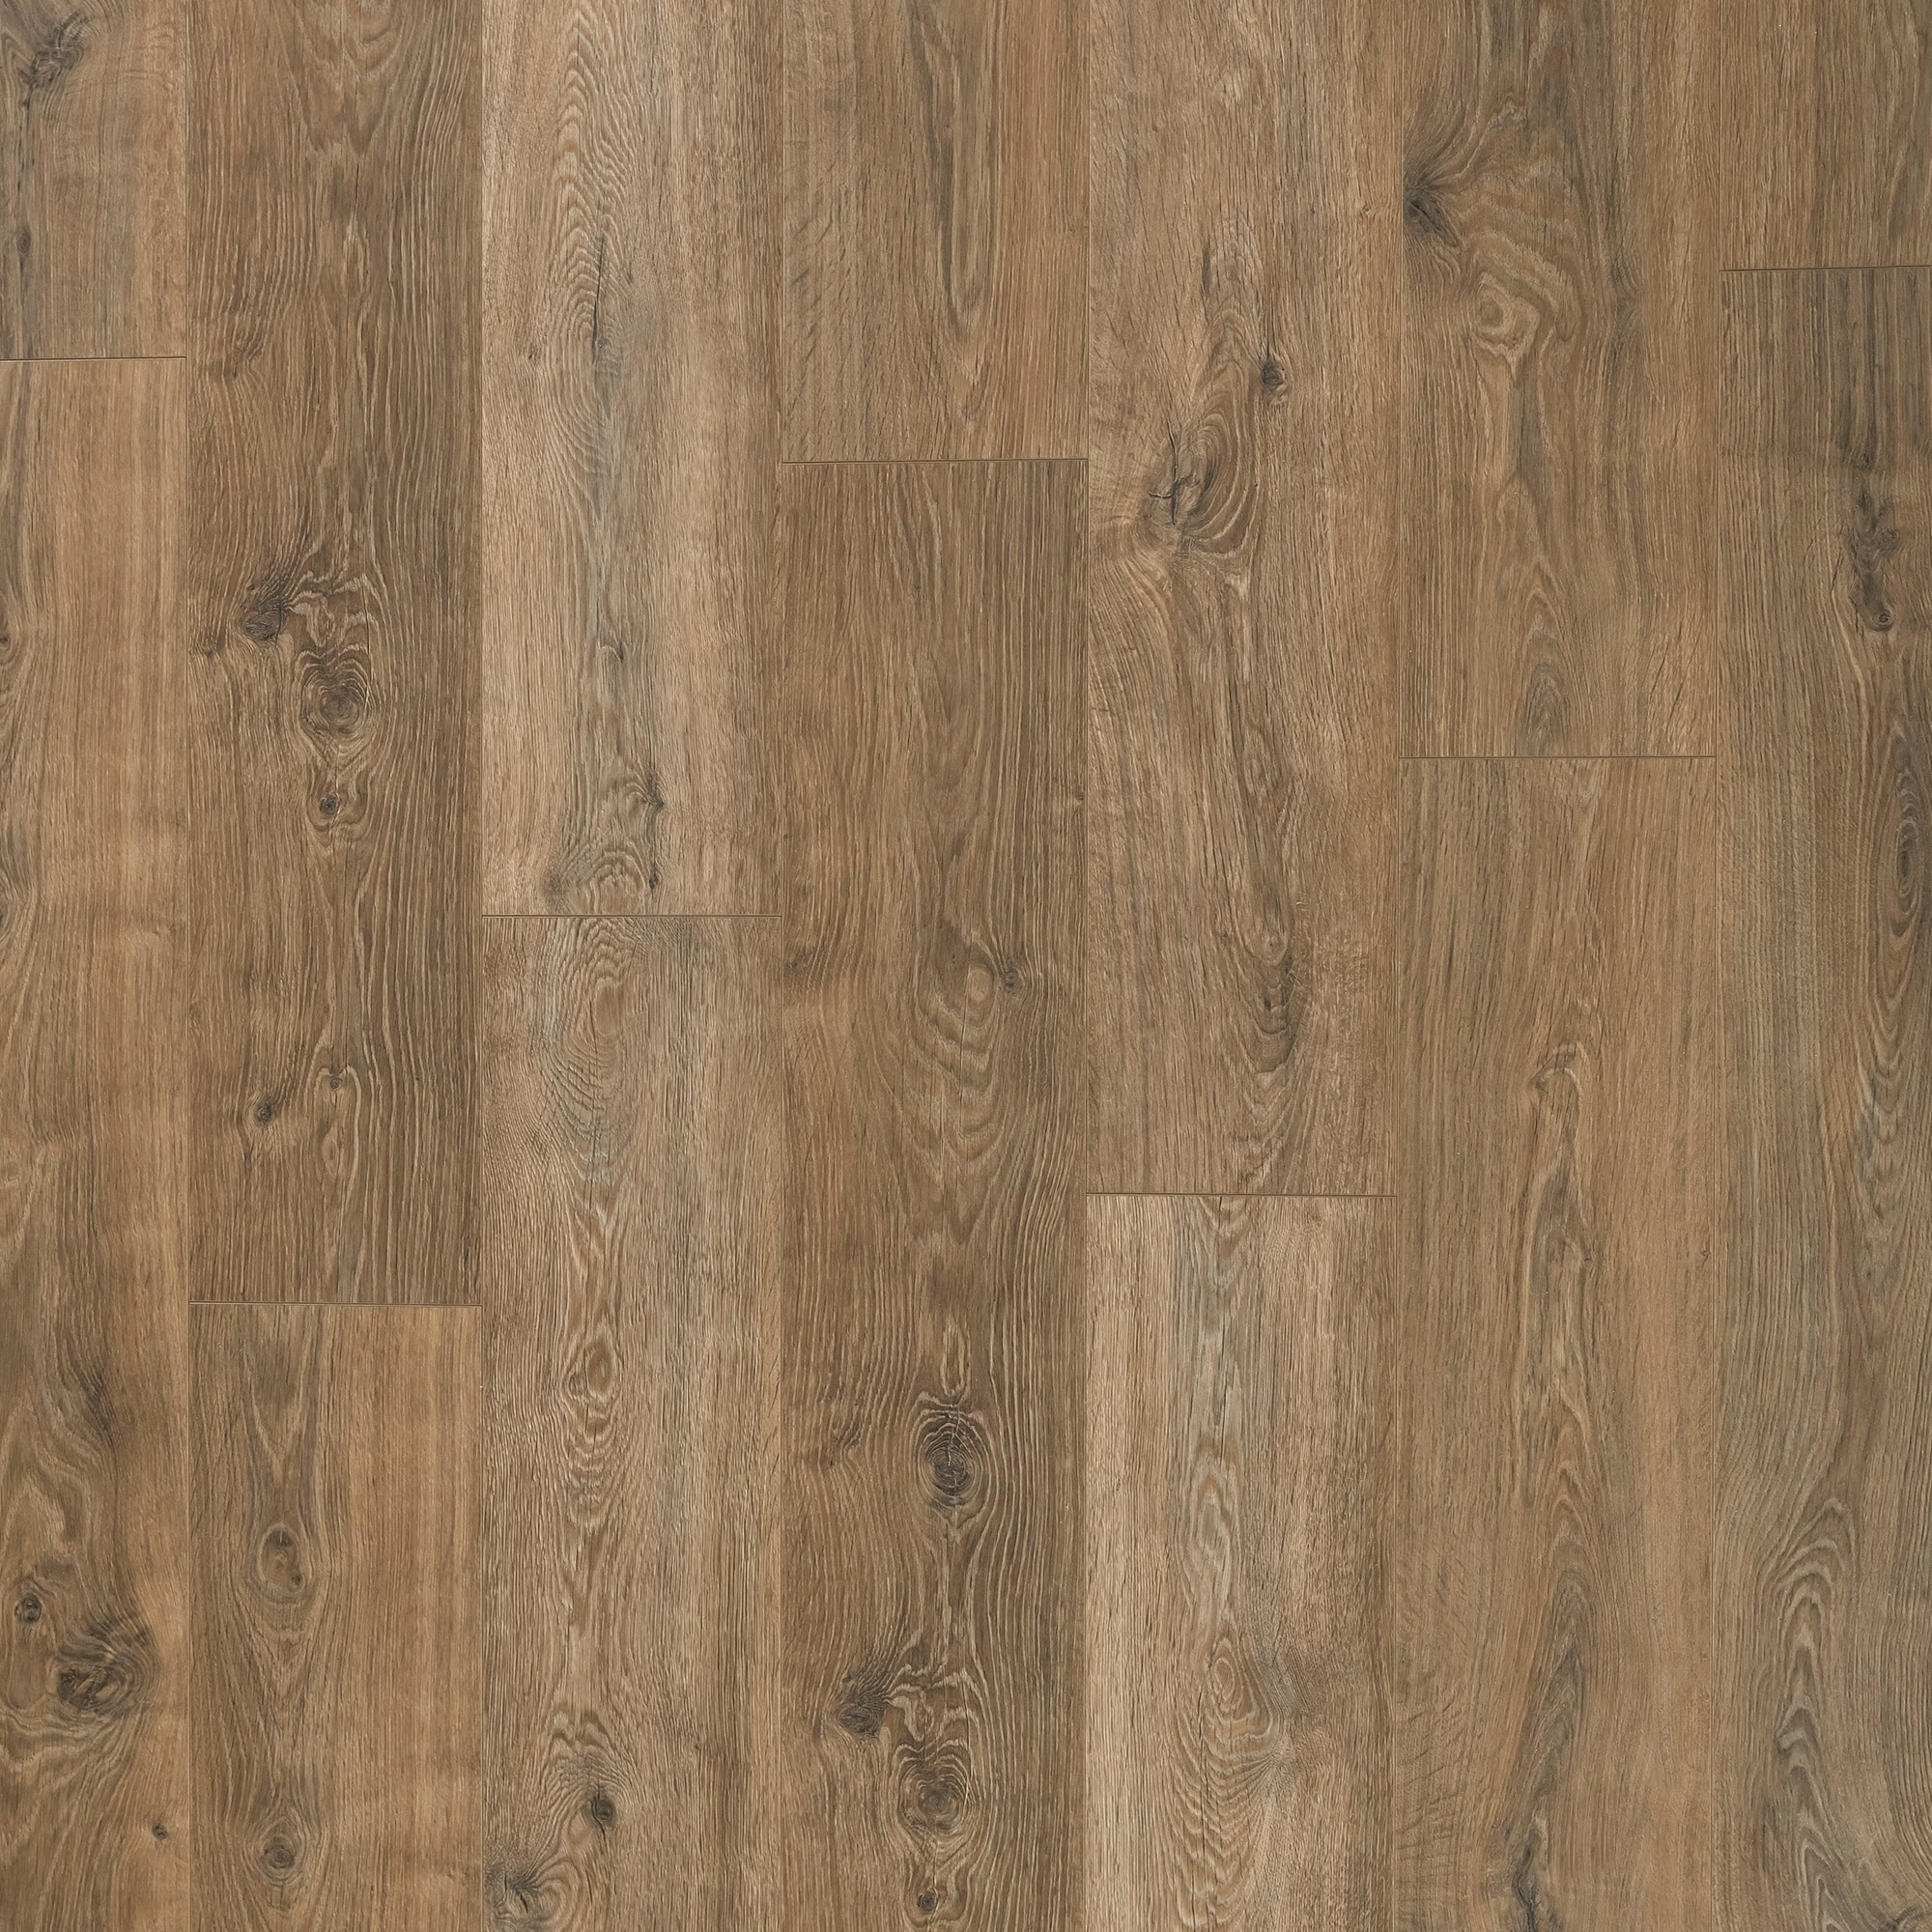 Pergo Xtra Dappled Oak 10-mm T x 7-in W x 48-in L Waterproof Wood Plank Laminate Flooring ft) in the Laminate Flooring department at Lowes.com